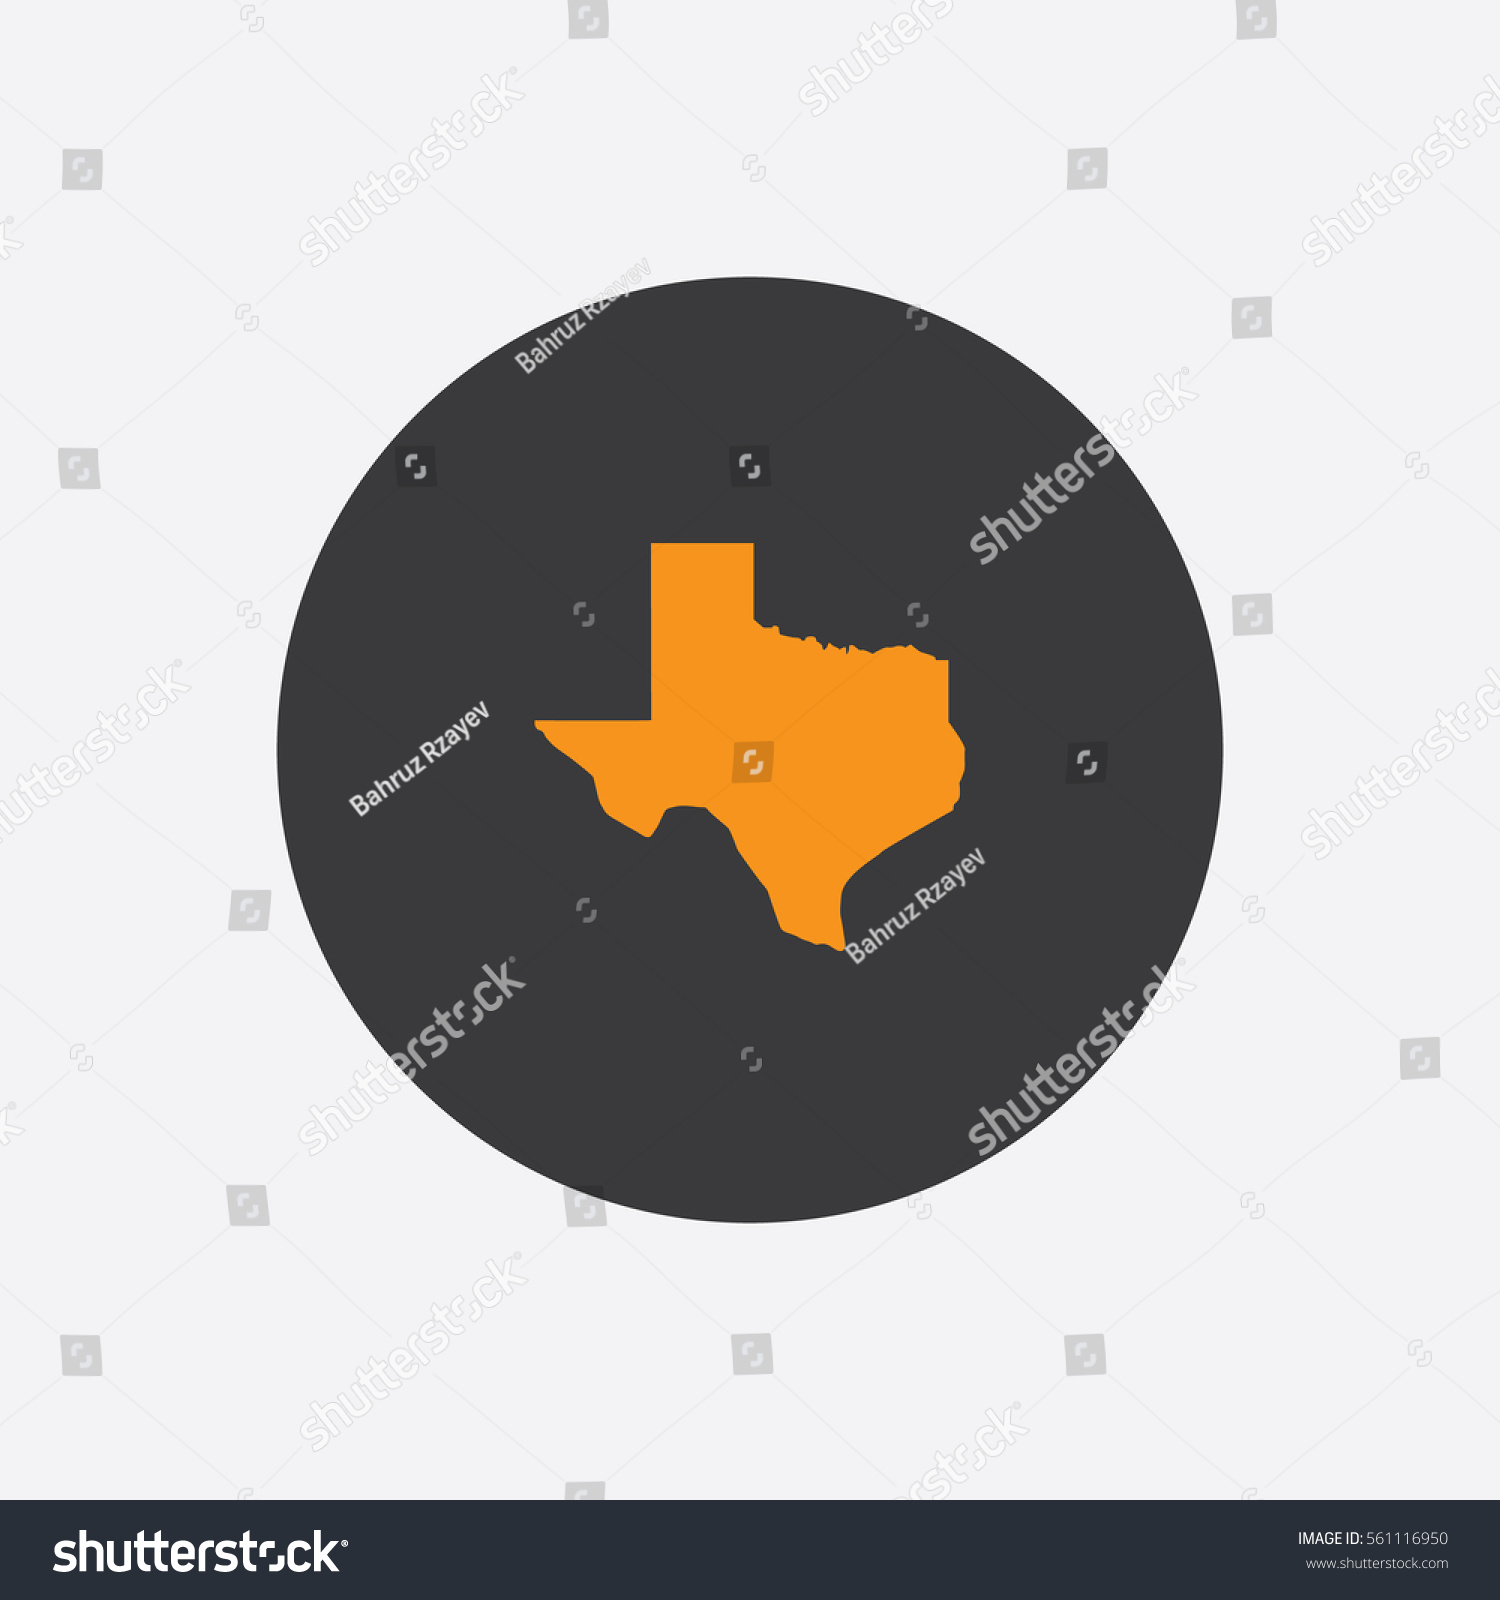 Map Of Texas Vector Illustration Royalty Free Stock Vector 561116950 2781